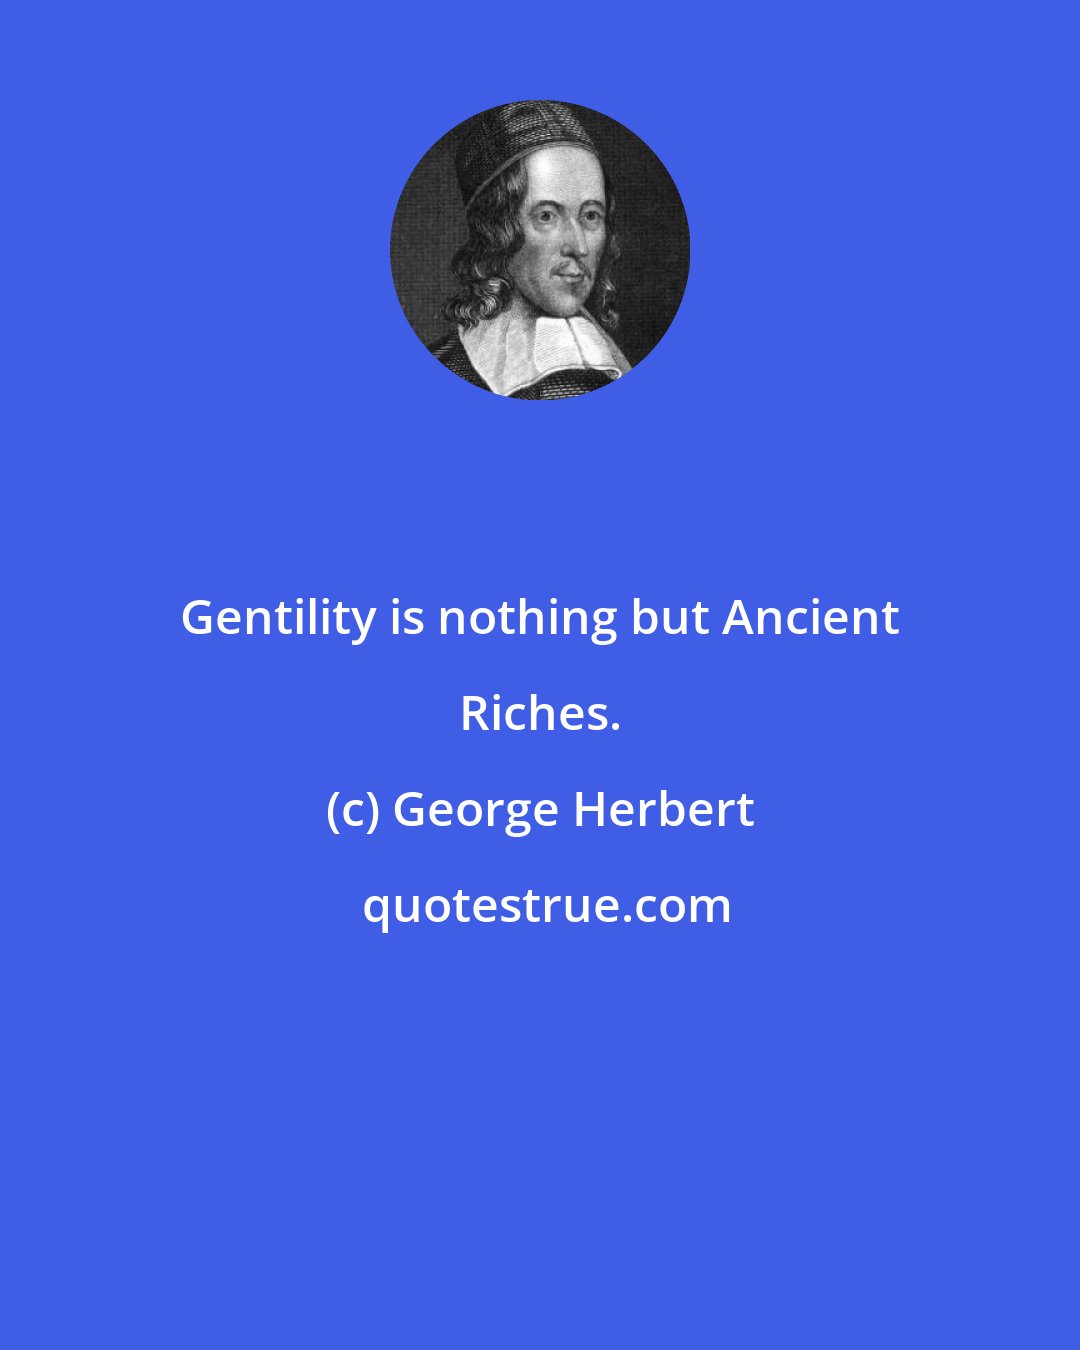 George Herbert: Gentility is nothing but Ancient Riches.